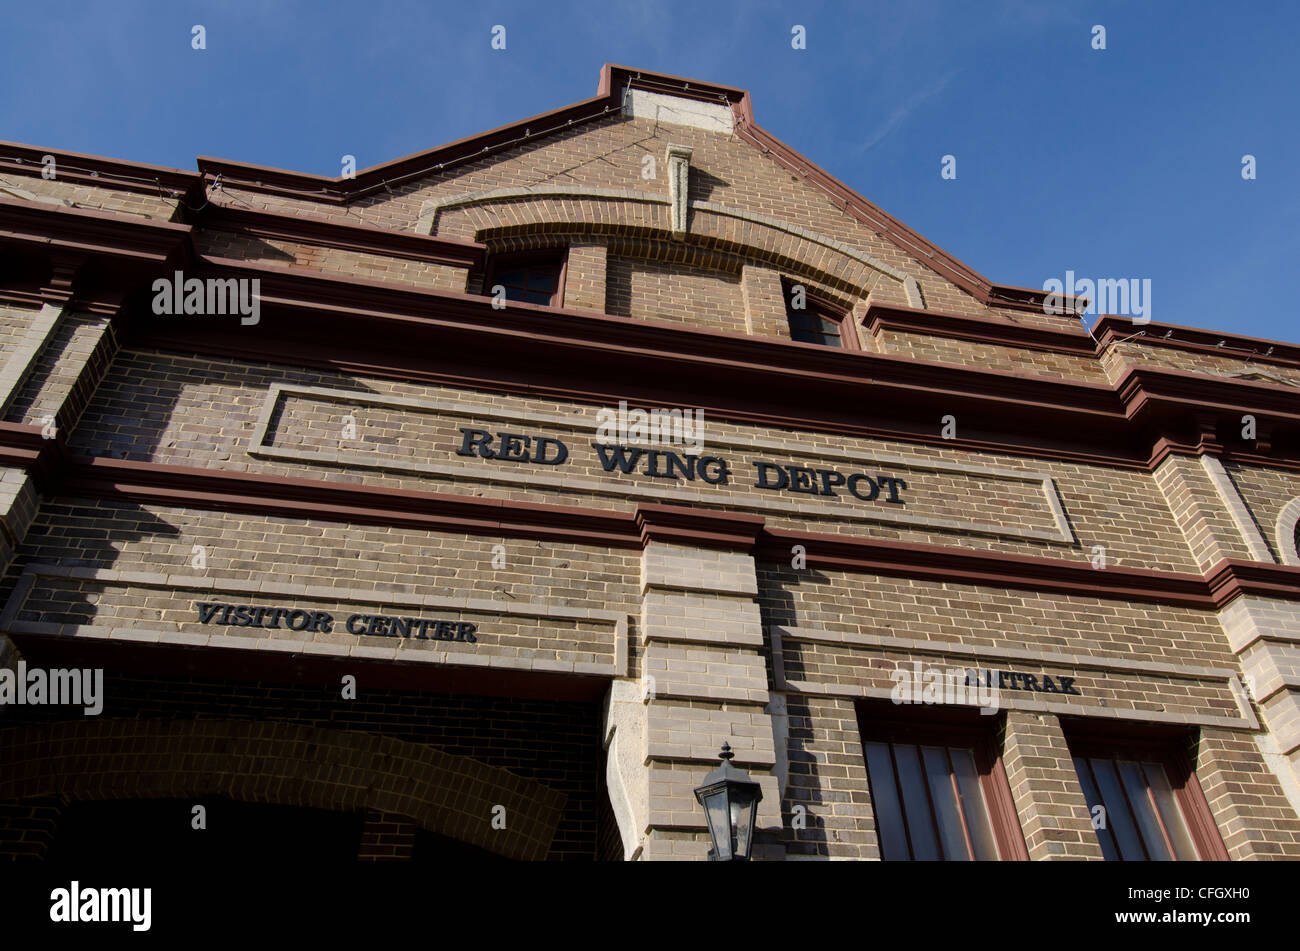 Red Wing Depot, Red Wing, Minnesota Banque D'Images